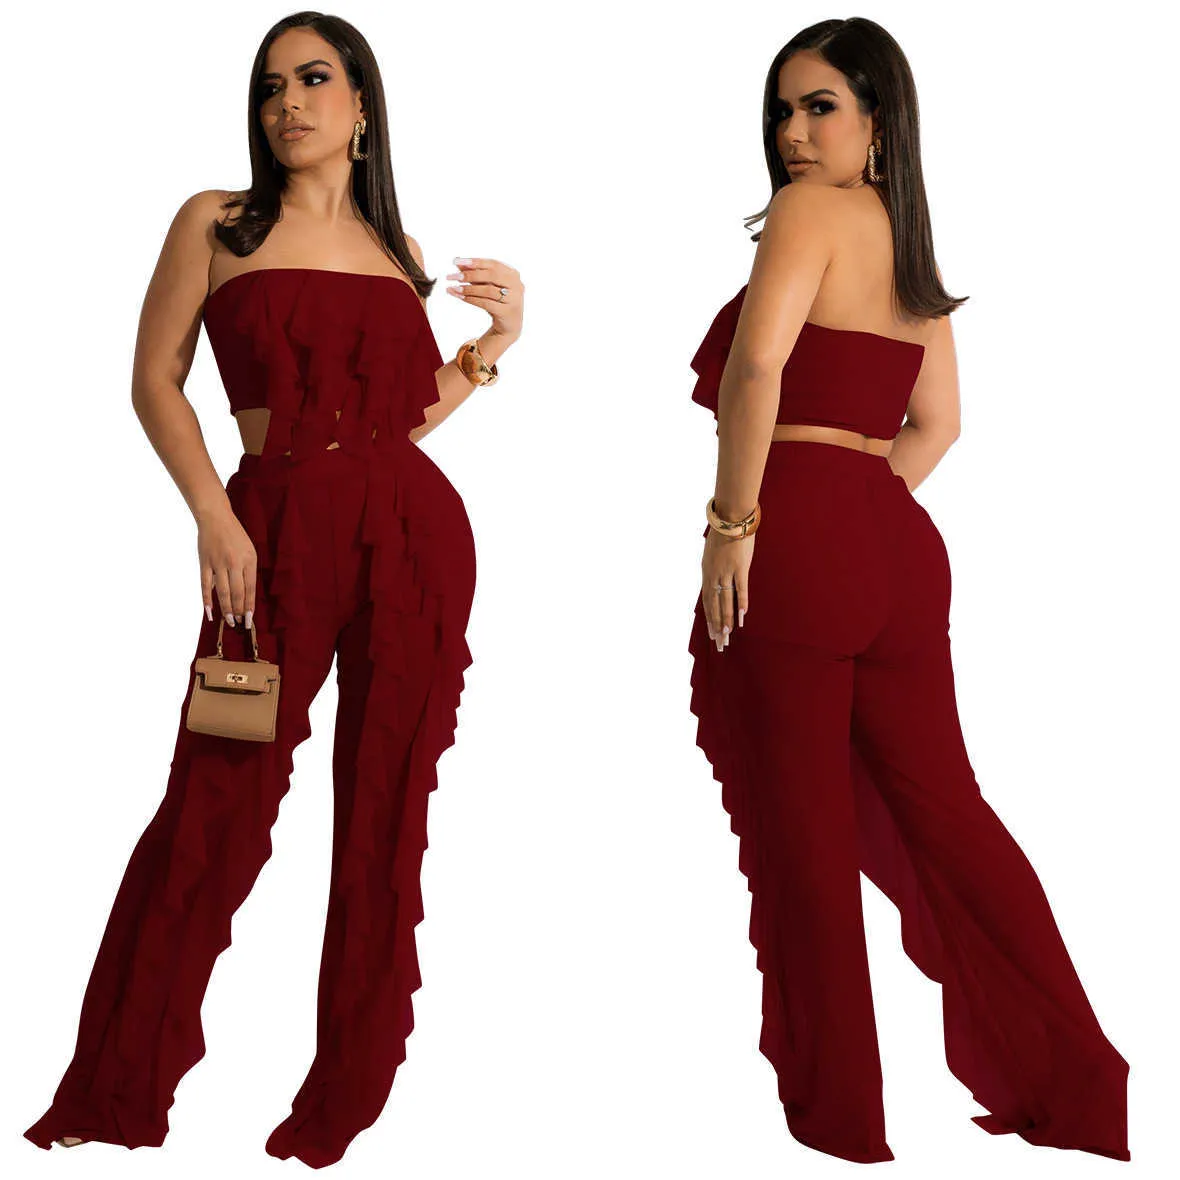 Sexig Strapless Splicing Byxor Set Ny sommar fritid Kvinnor Solid Color Ruffle Wrapped Bra Fashion Tassel Beach Suit